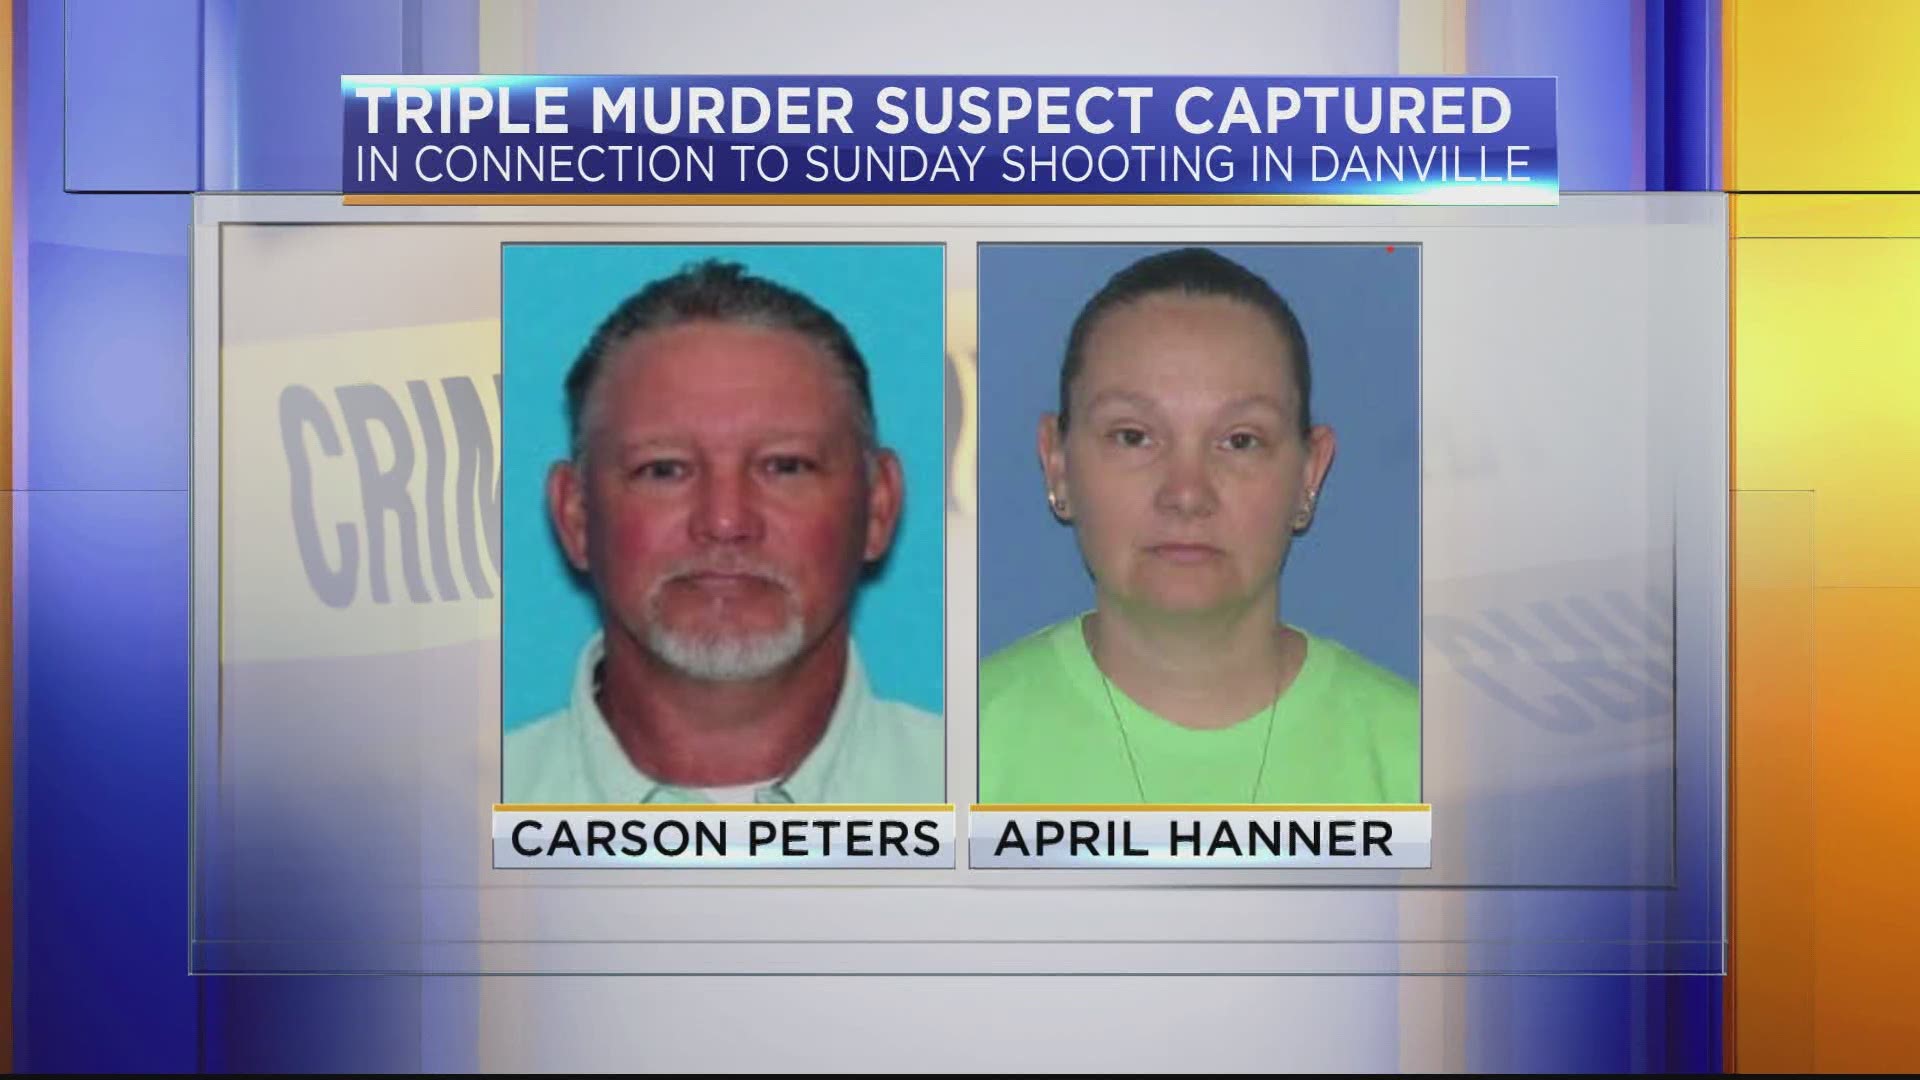 Decatur Police confirms that Carson Peters and April Hanner have been arrested and are in custody, during a press conference Tuesday evening.